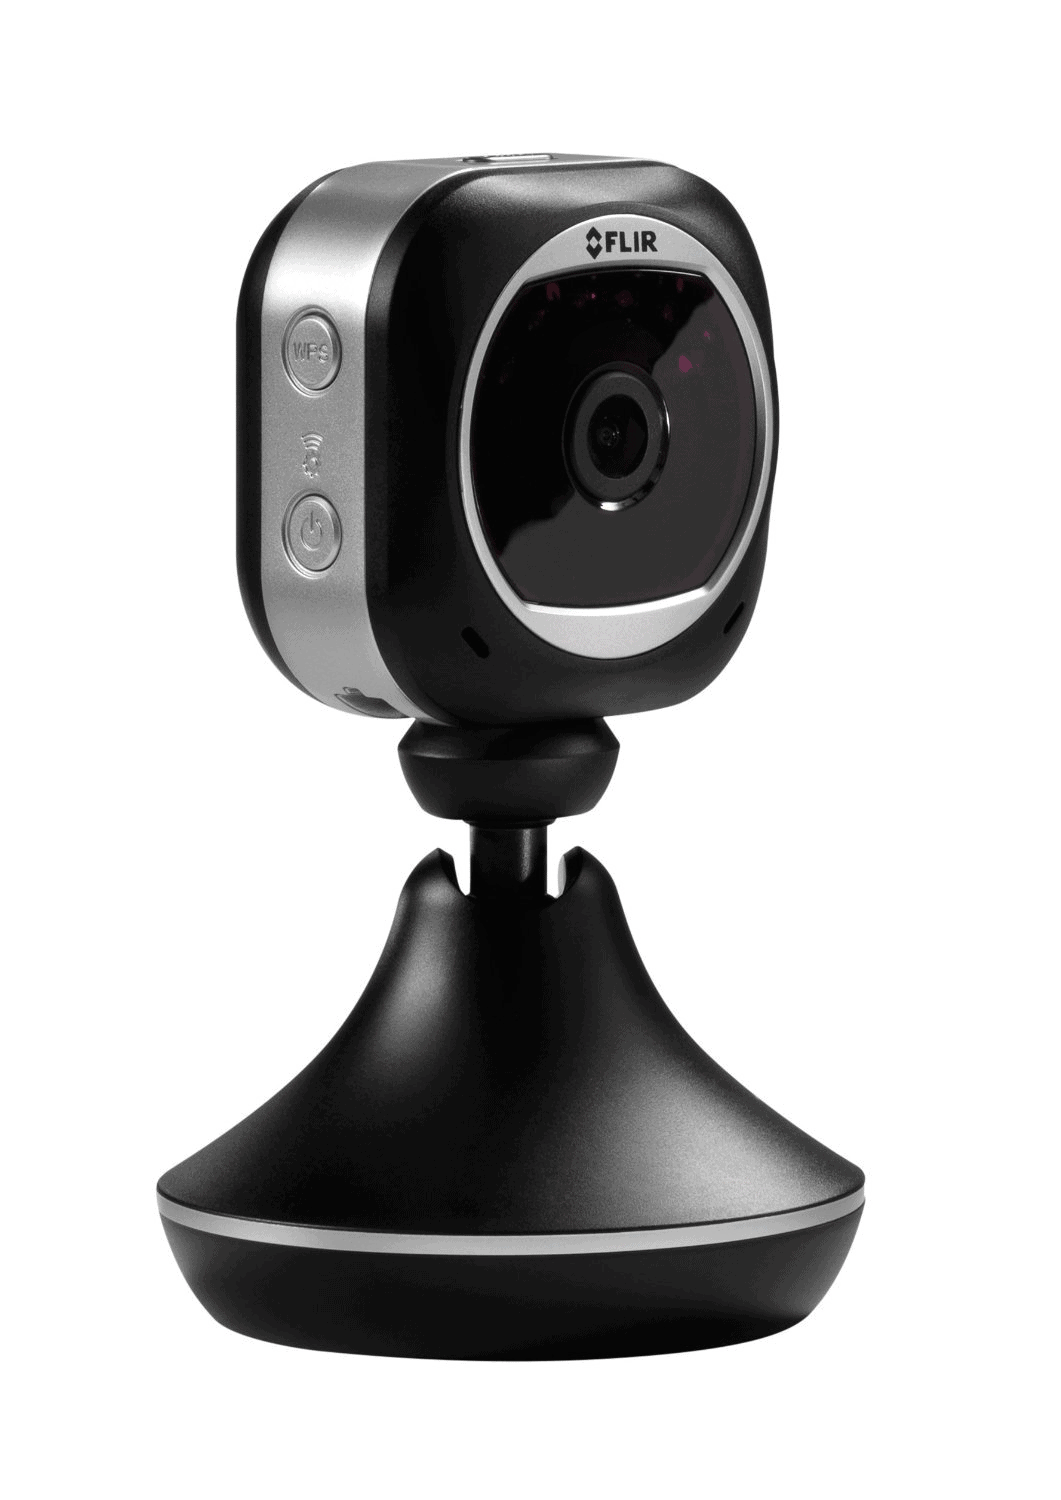 15 Best Wireless Security Camera Rated By Experts 16